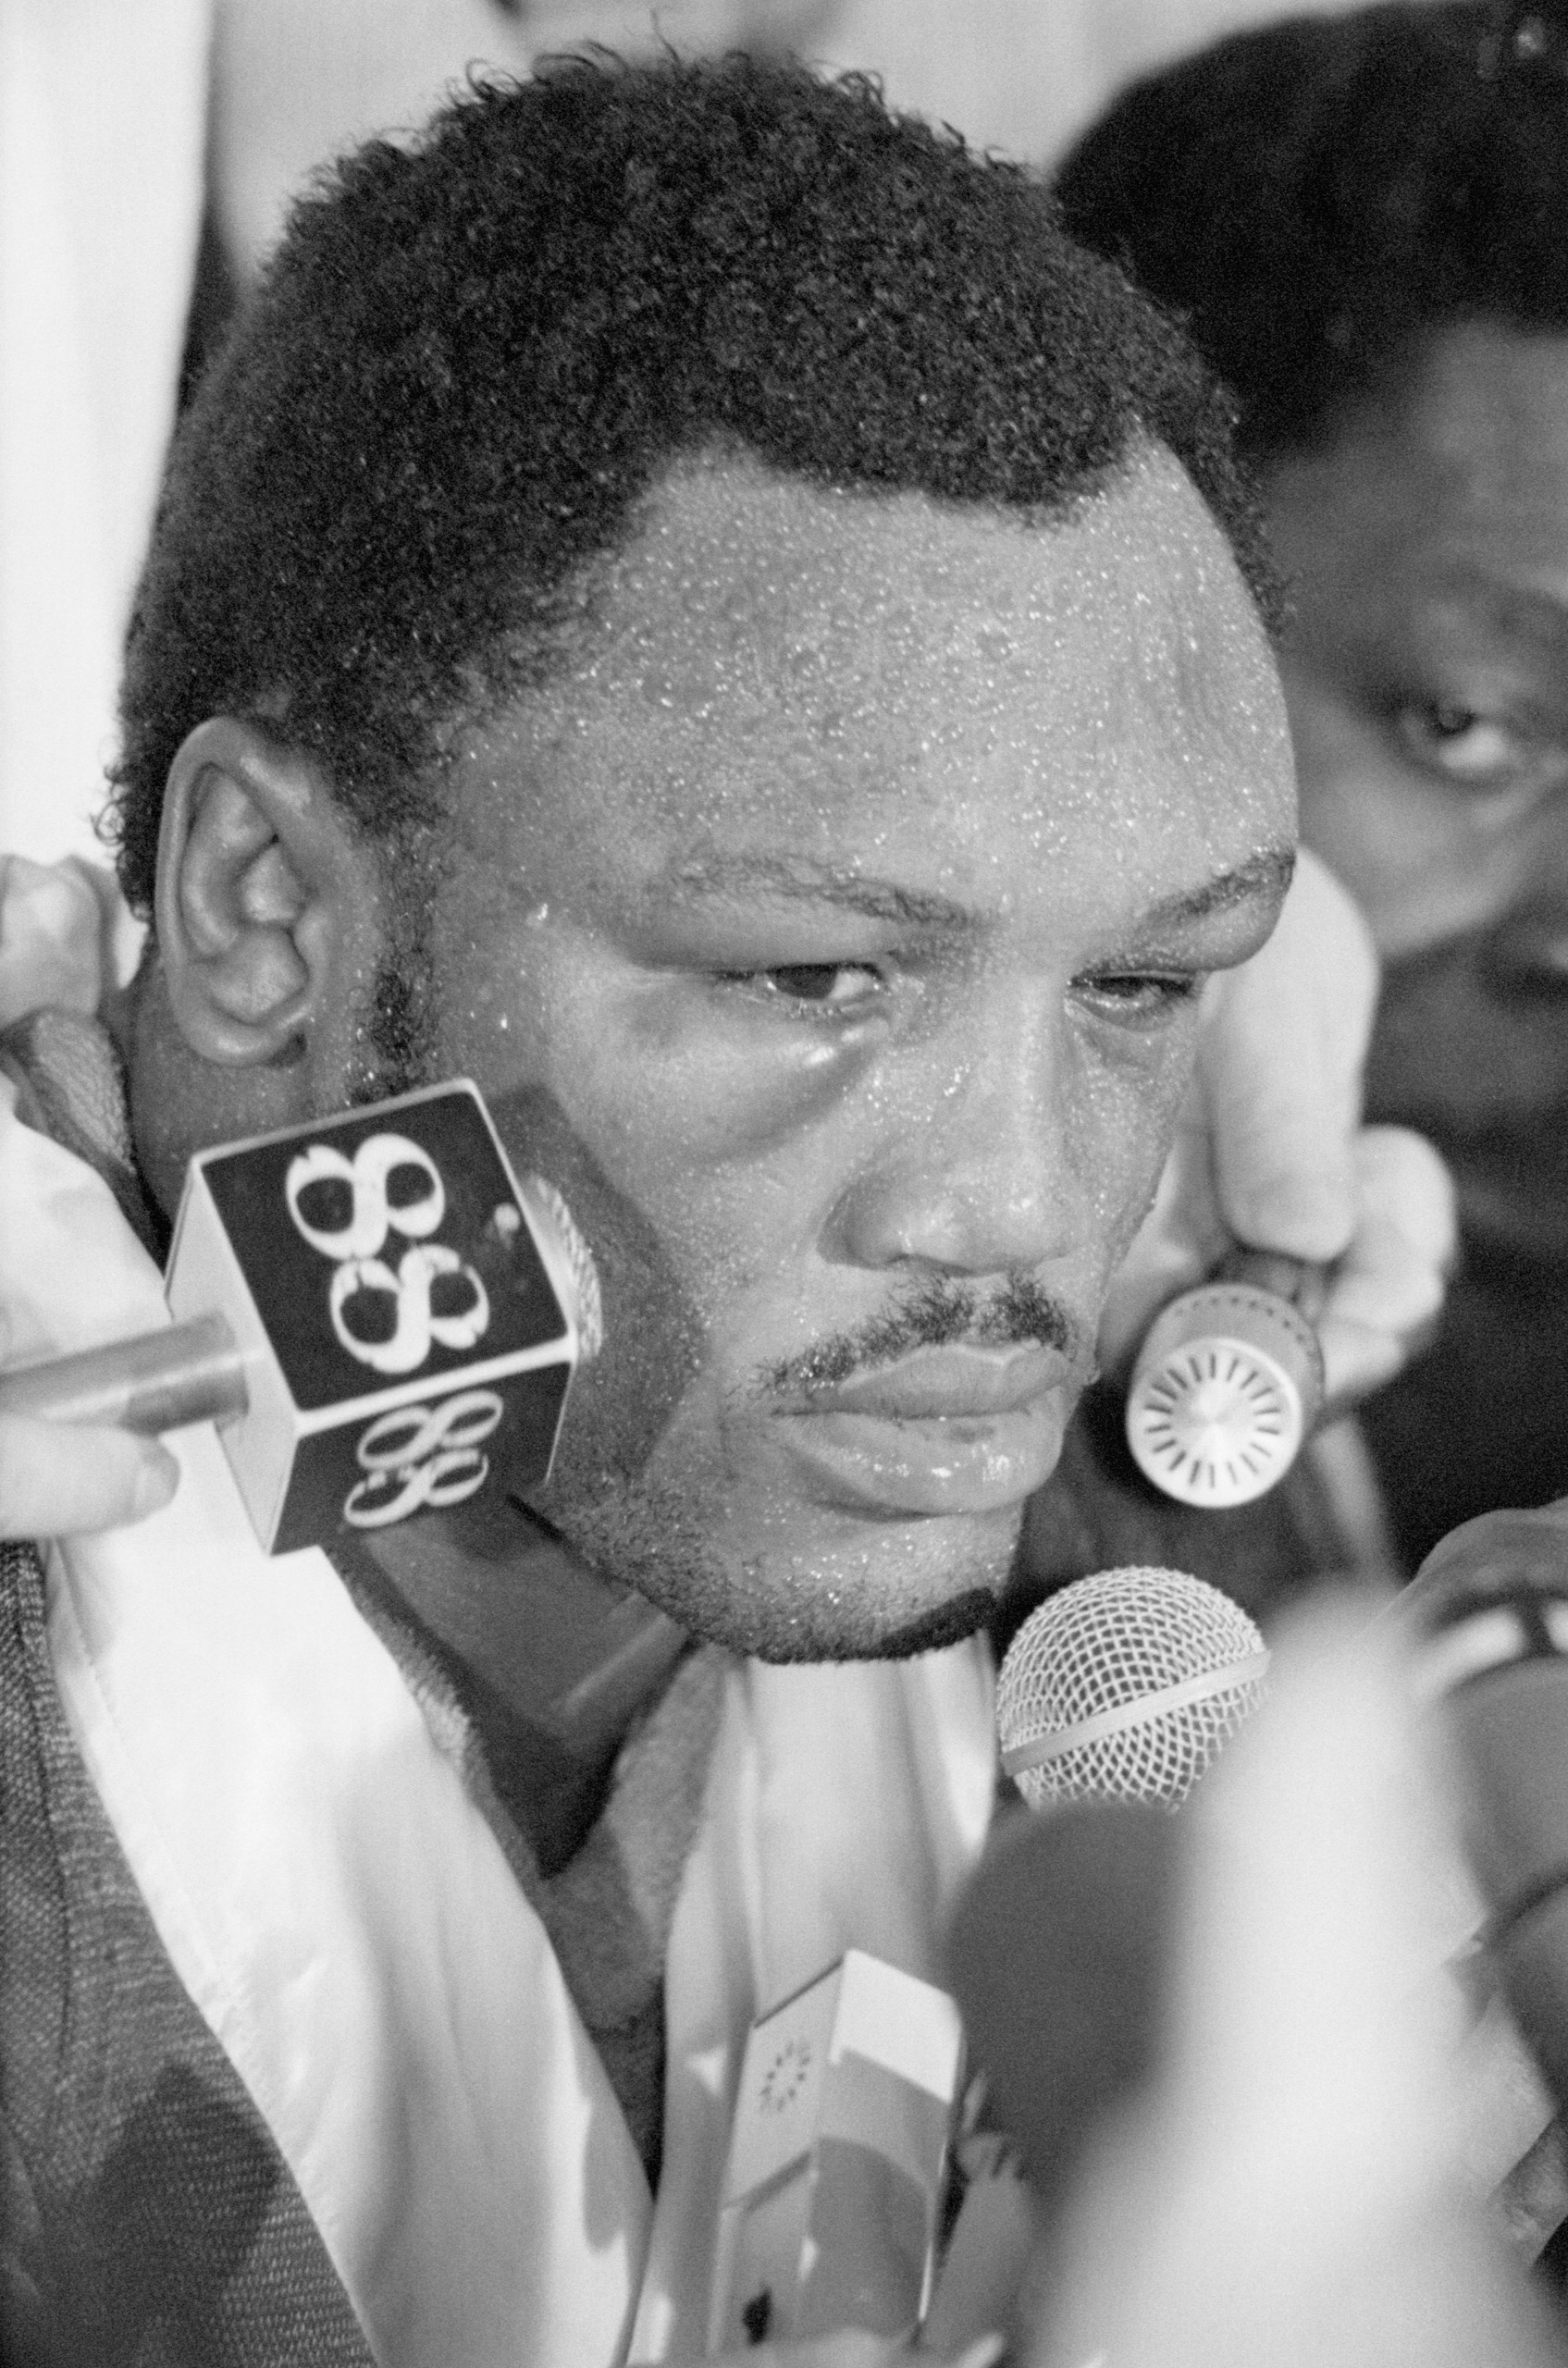 Challenger Joe Frazier, showing puffed eyes, talks to members of the press after suffering a TKO in the 14th round of his 15-round heavyweight championship match against champion Muhammad Ali. Manila, Luzon Island, Philippines, October 1, 1975.